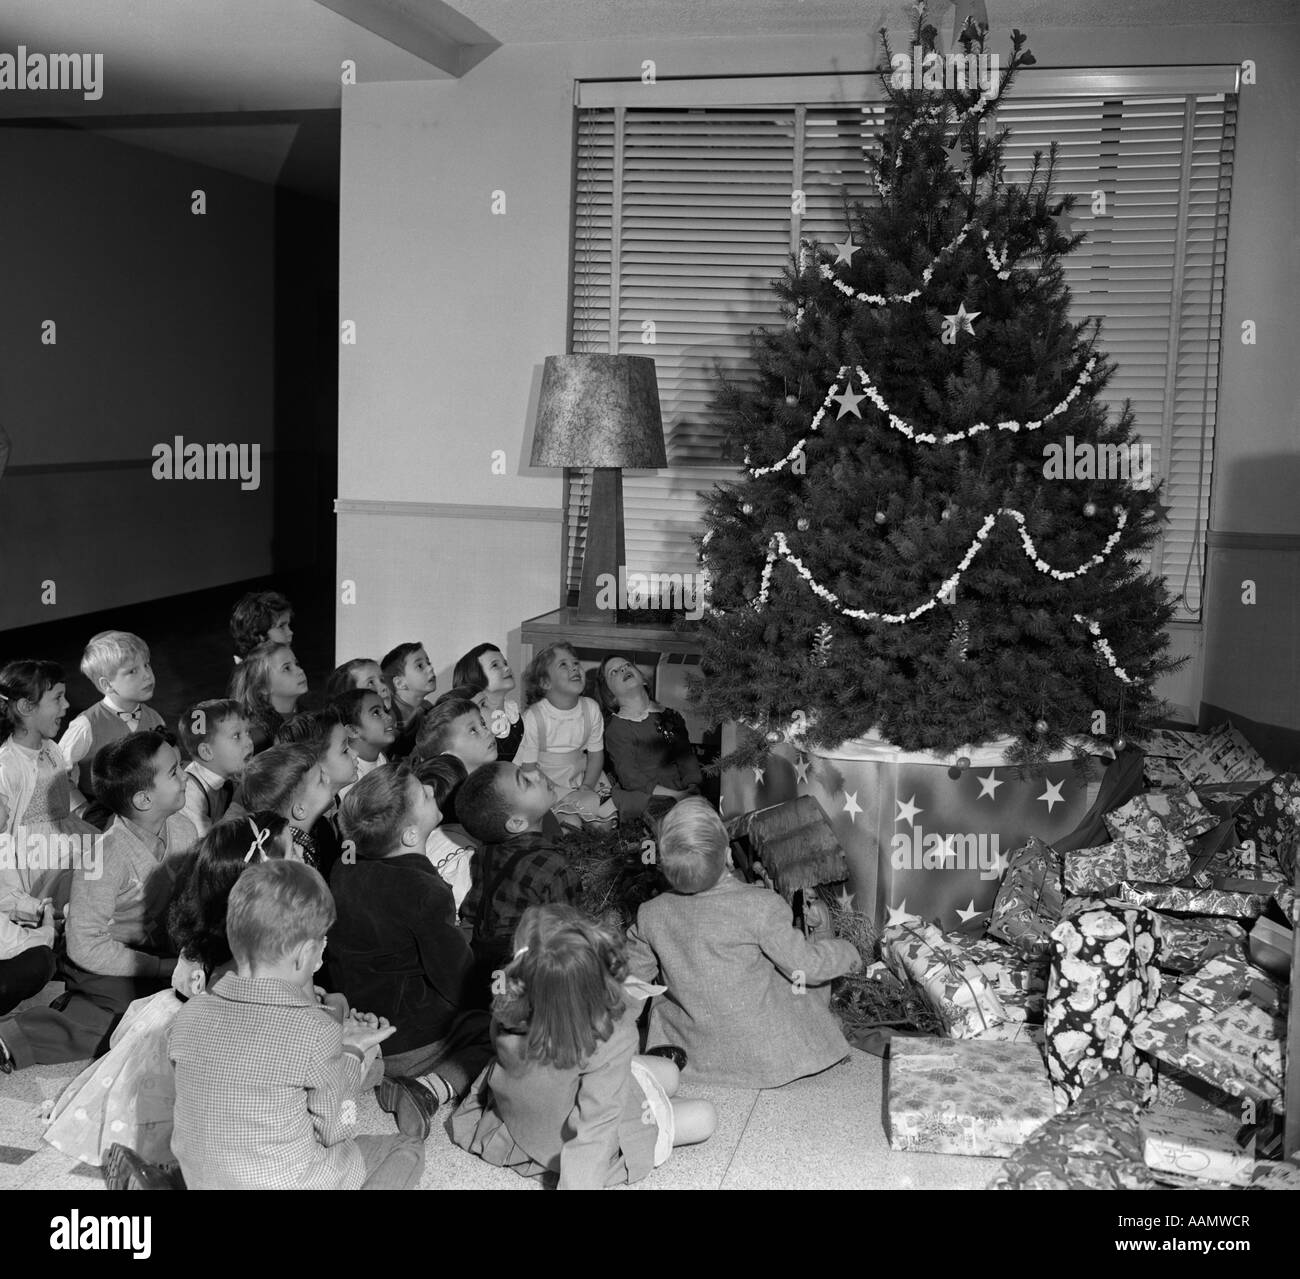 1950s SEATED GROUP OF 20 CHILDREN LOOKING UP AT CHRISTMAS TREE DECORATED WITH POPCORN AND STARS Stock Photo